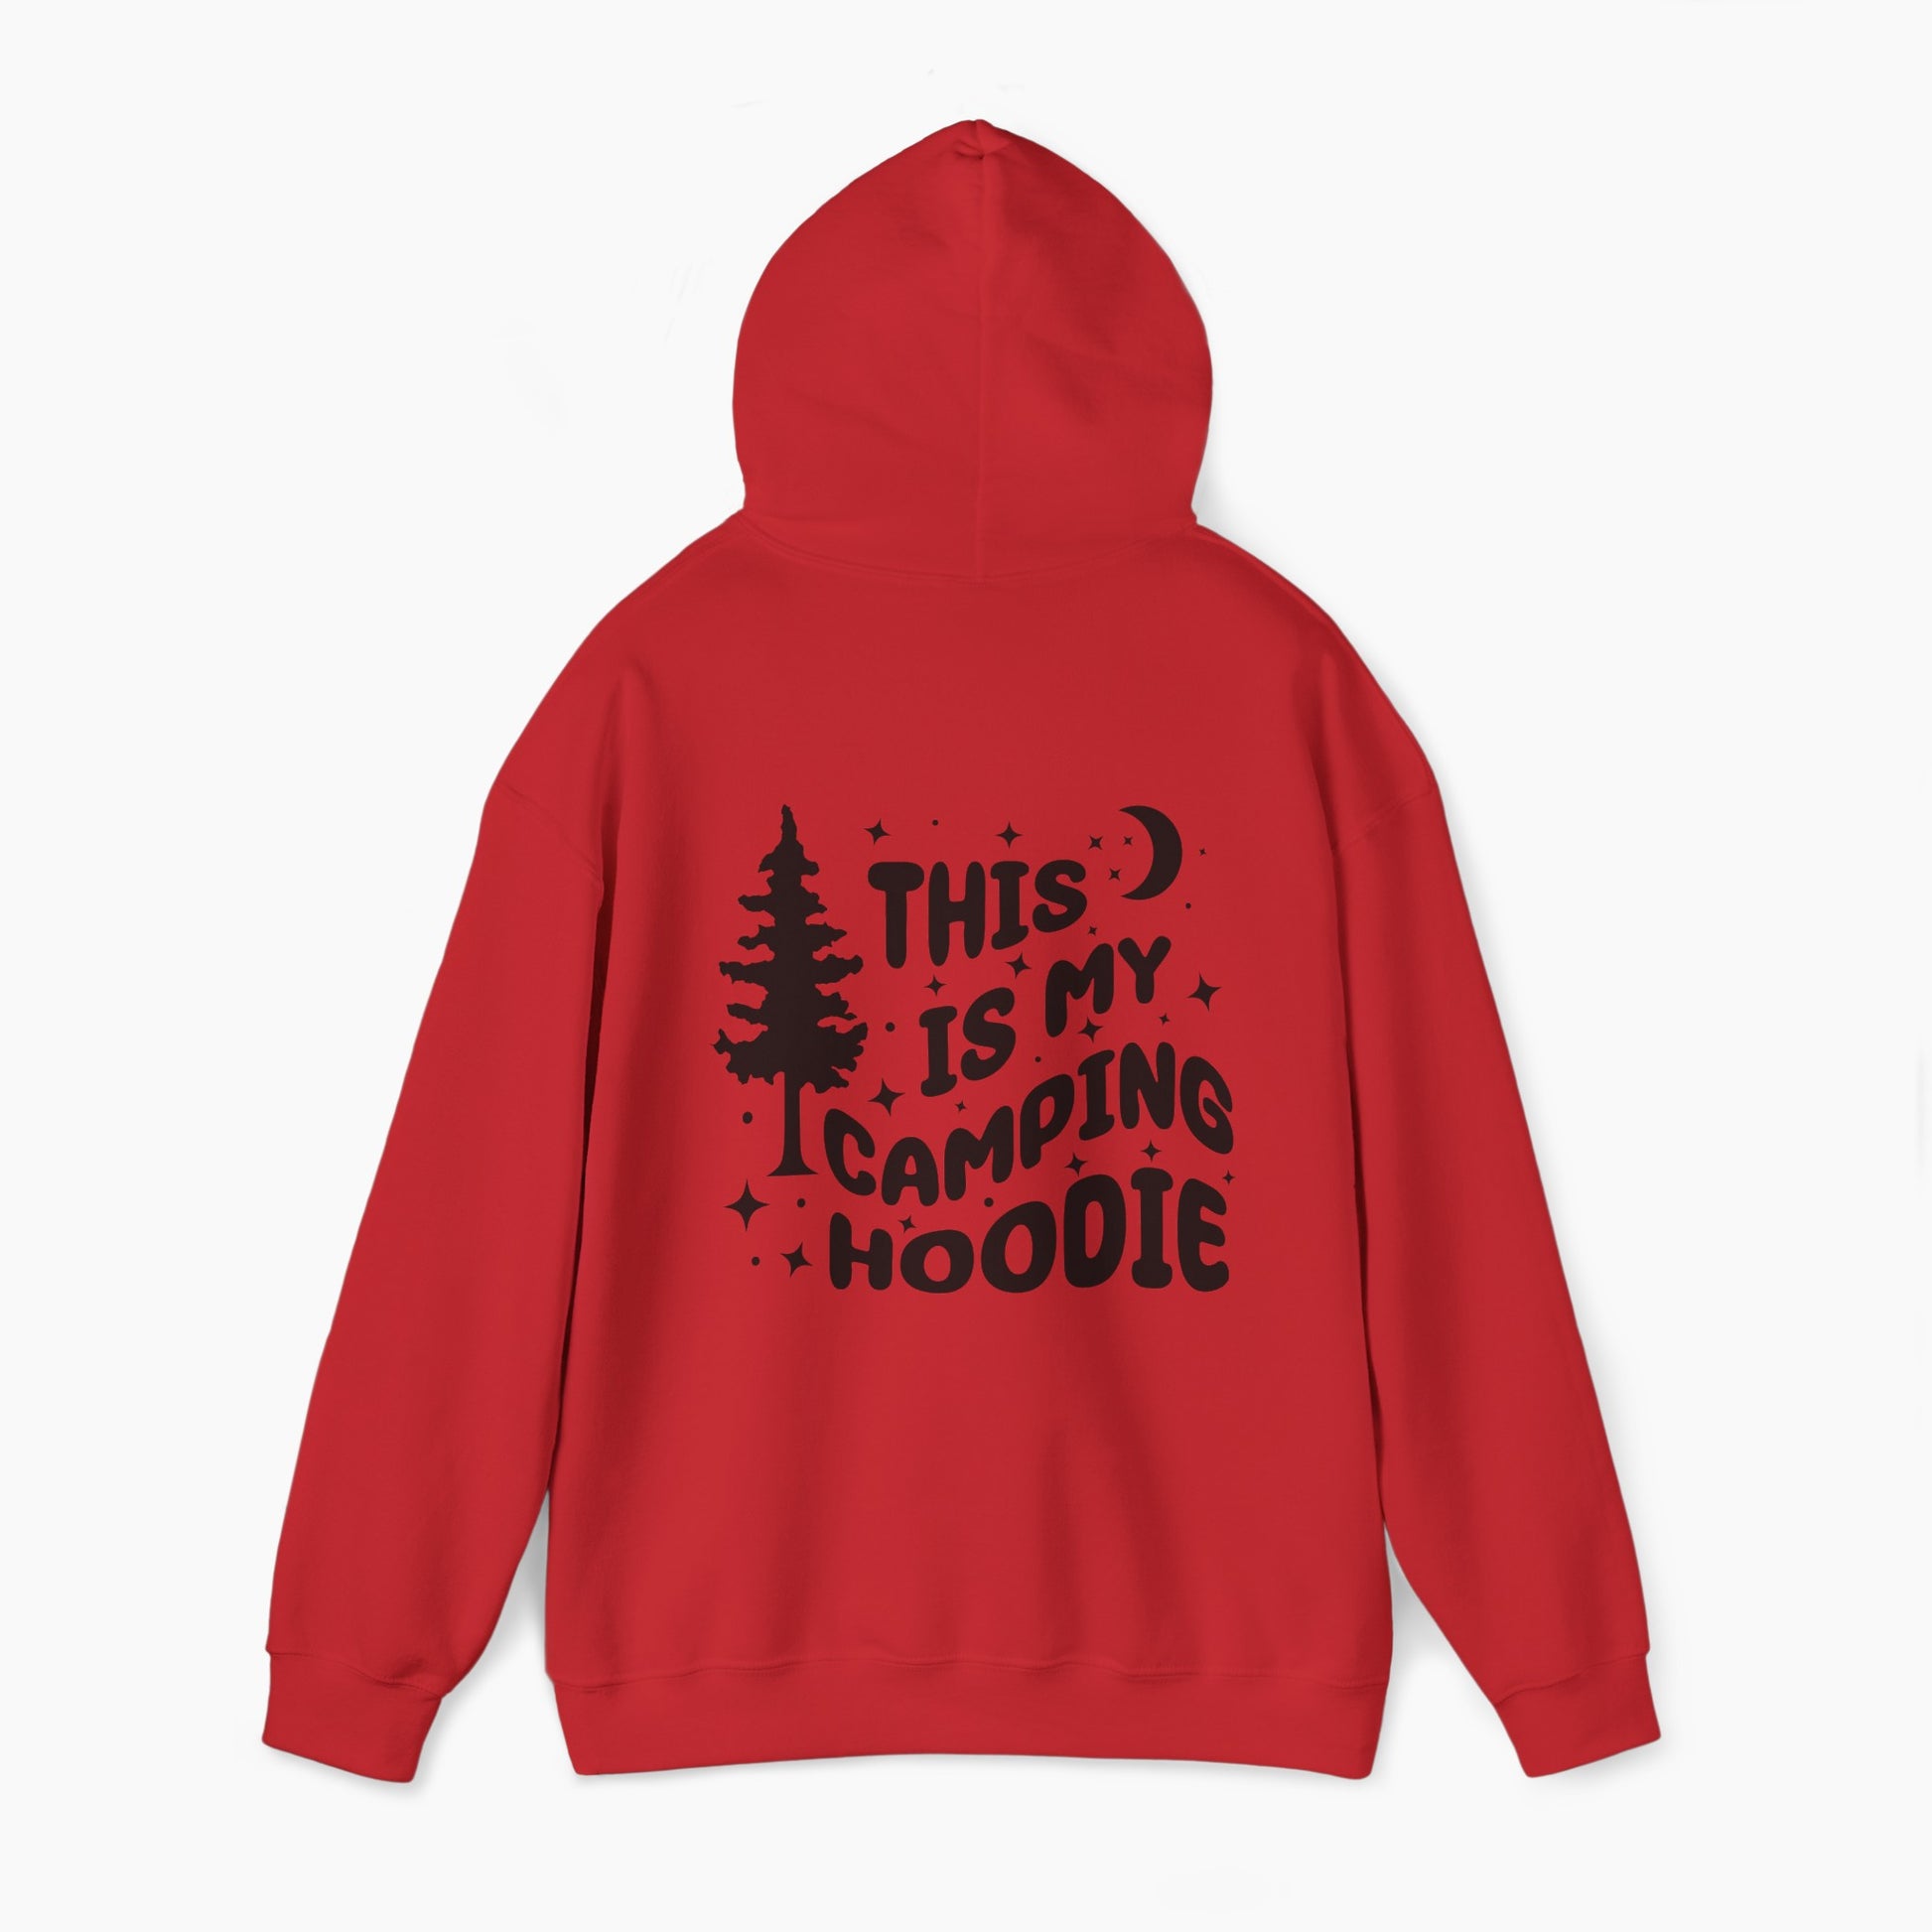 Back of red hoodie featuring the text 'This is my camping hoodie,' with a design of a camping van, moon, stars, and a tree on a plain background.